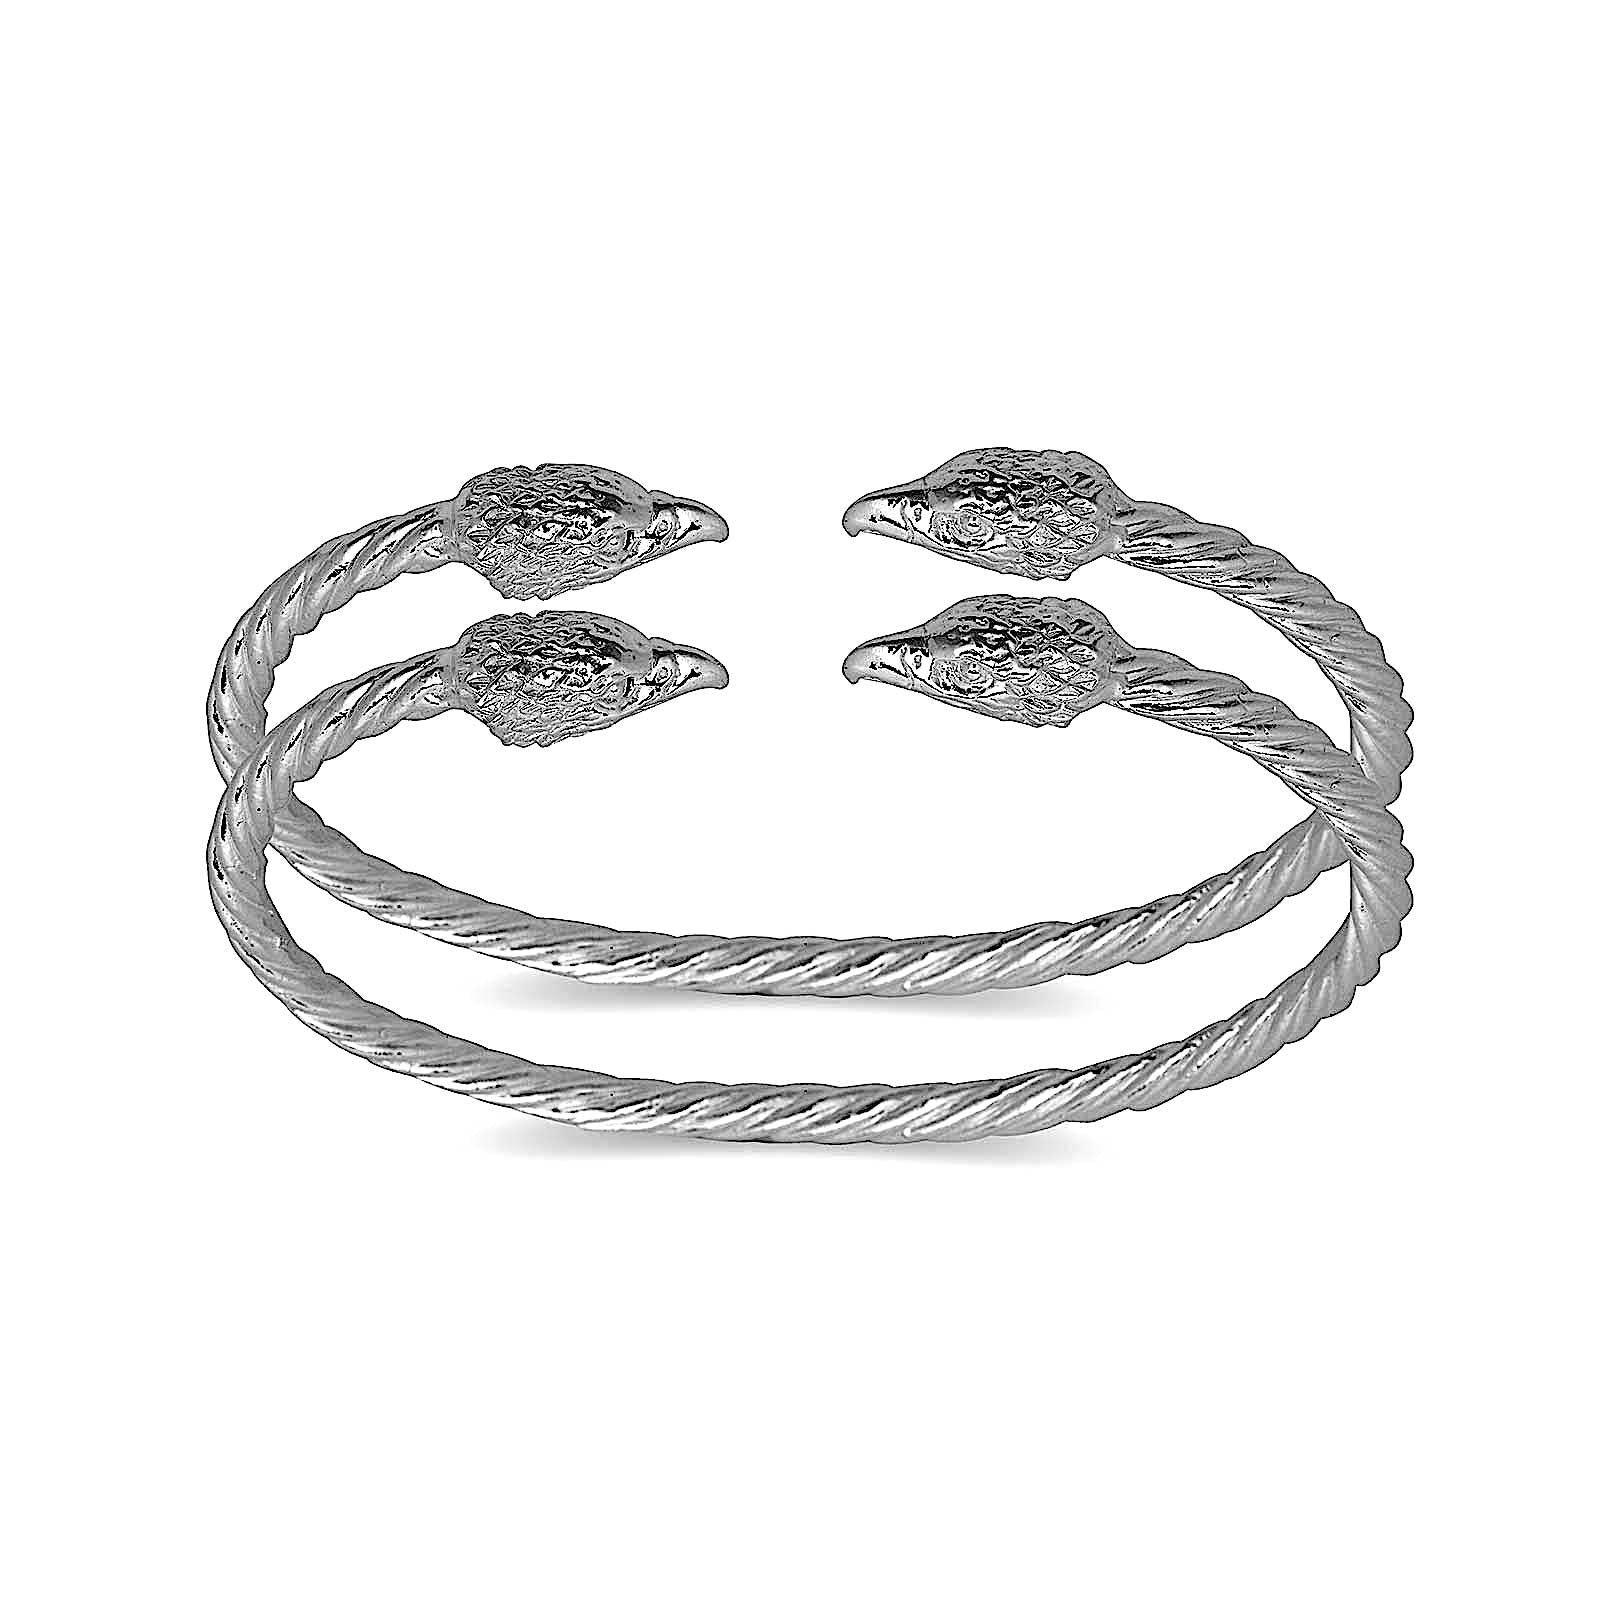 Eagle ends coiled rope West Indian bangles .925 Sterling silver (MADE IN USA) (pair) - Betterjewelry